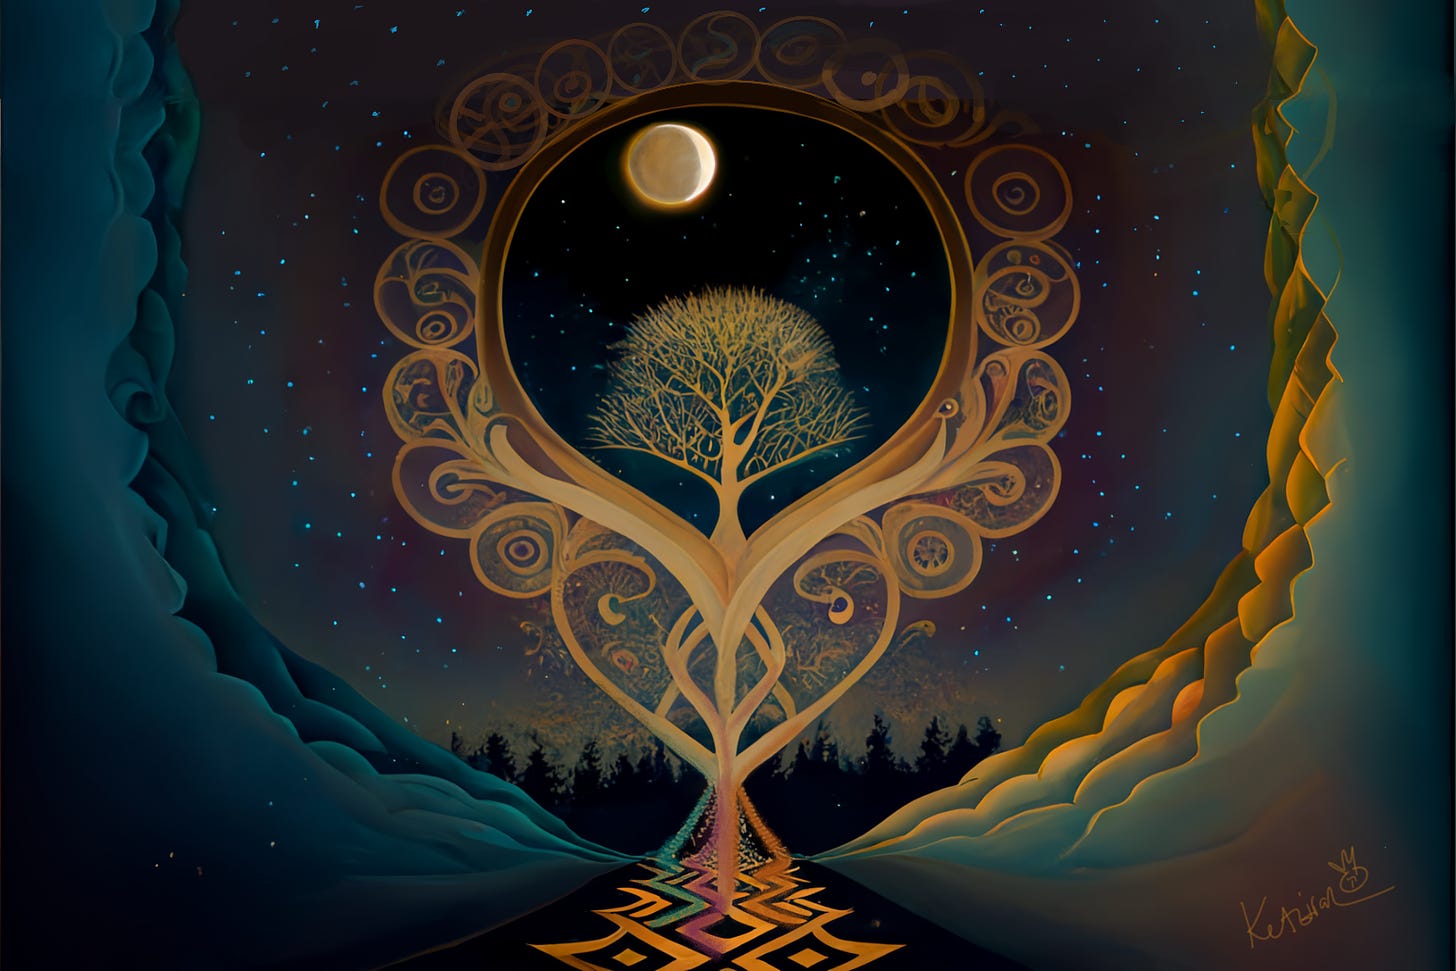 Digital illustration of a night sky with a golden tree with colorful accents in the center and a clear waxing moon.